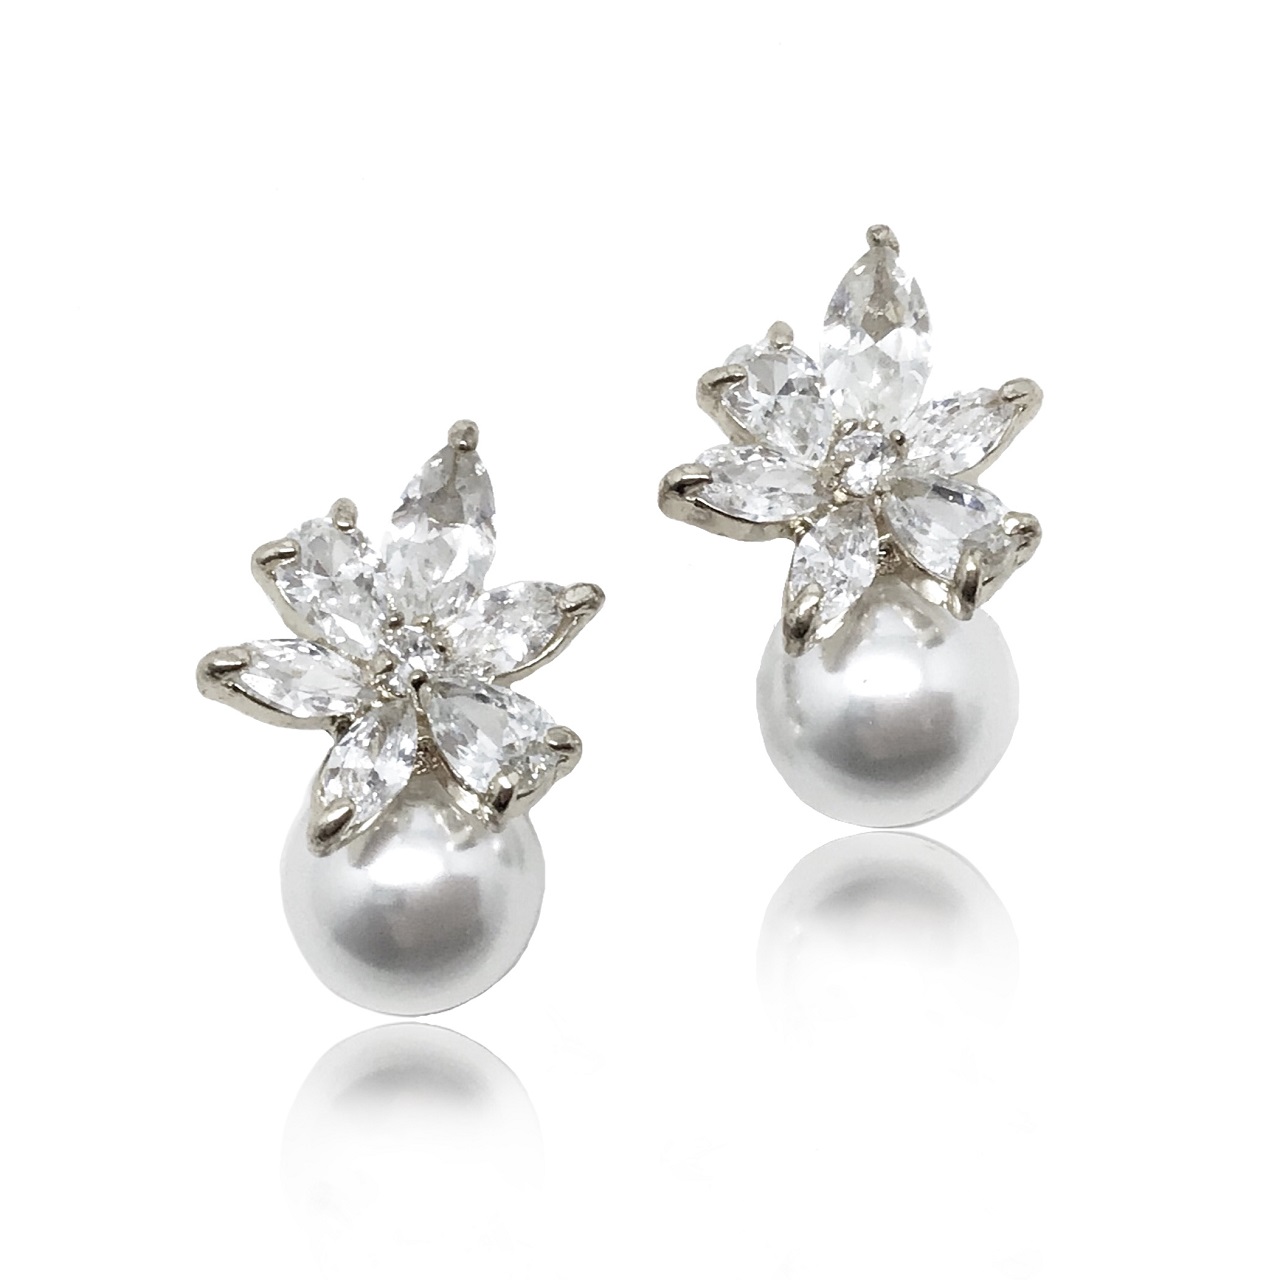 Silver and pearl earrings|Brandy|Jeanette Maree|Shop Online Now